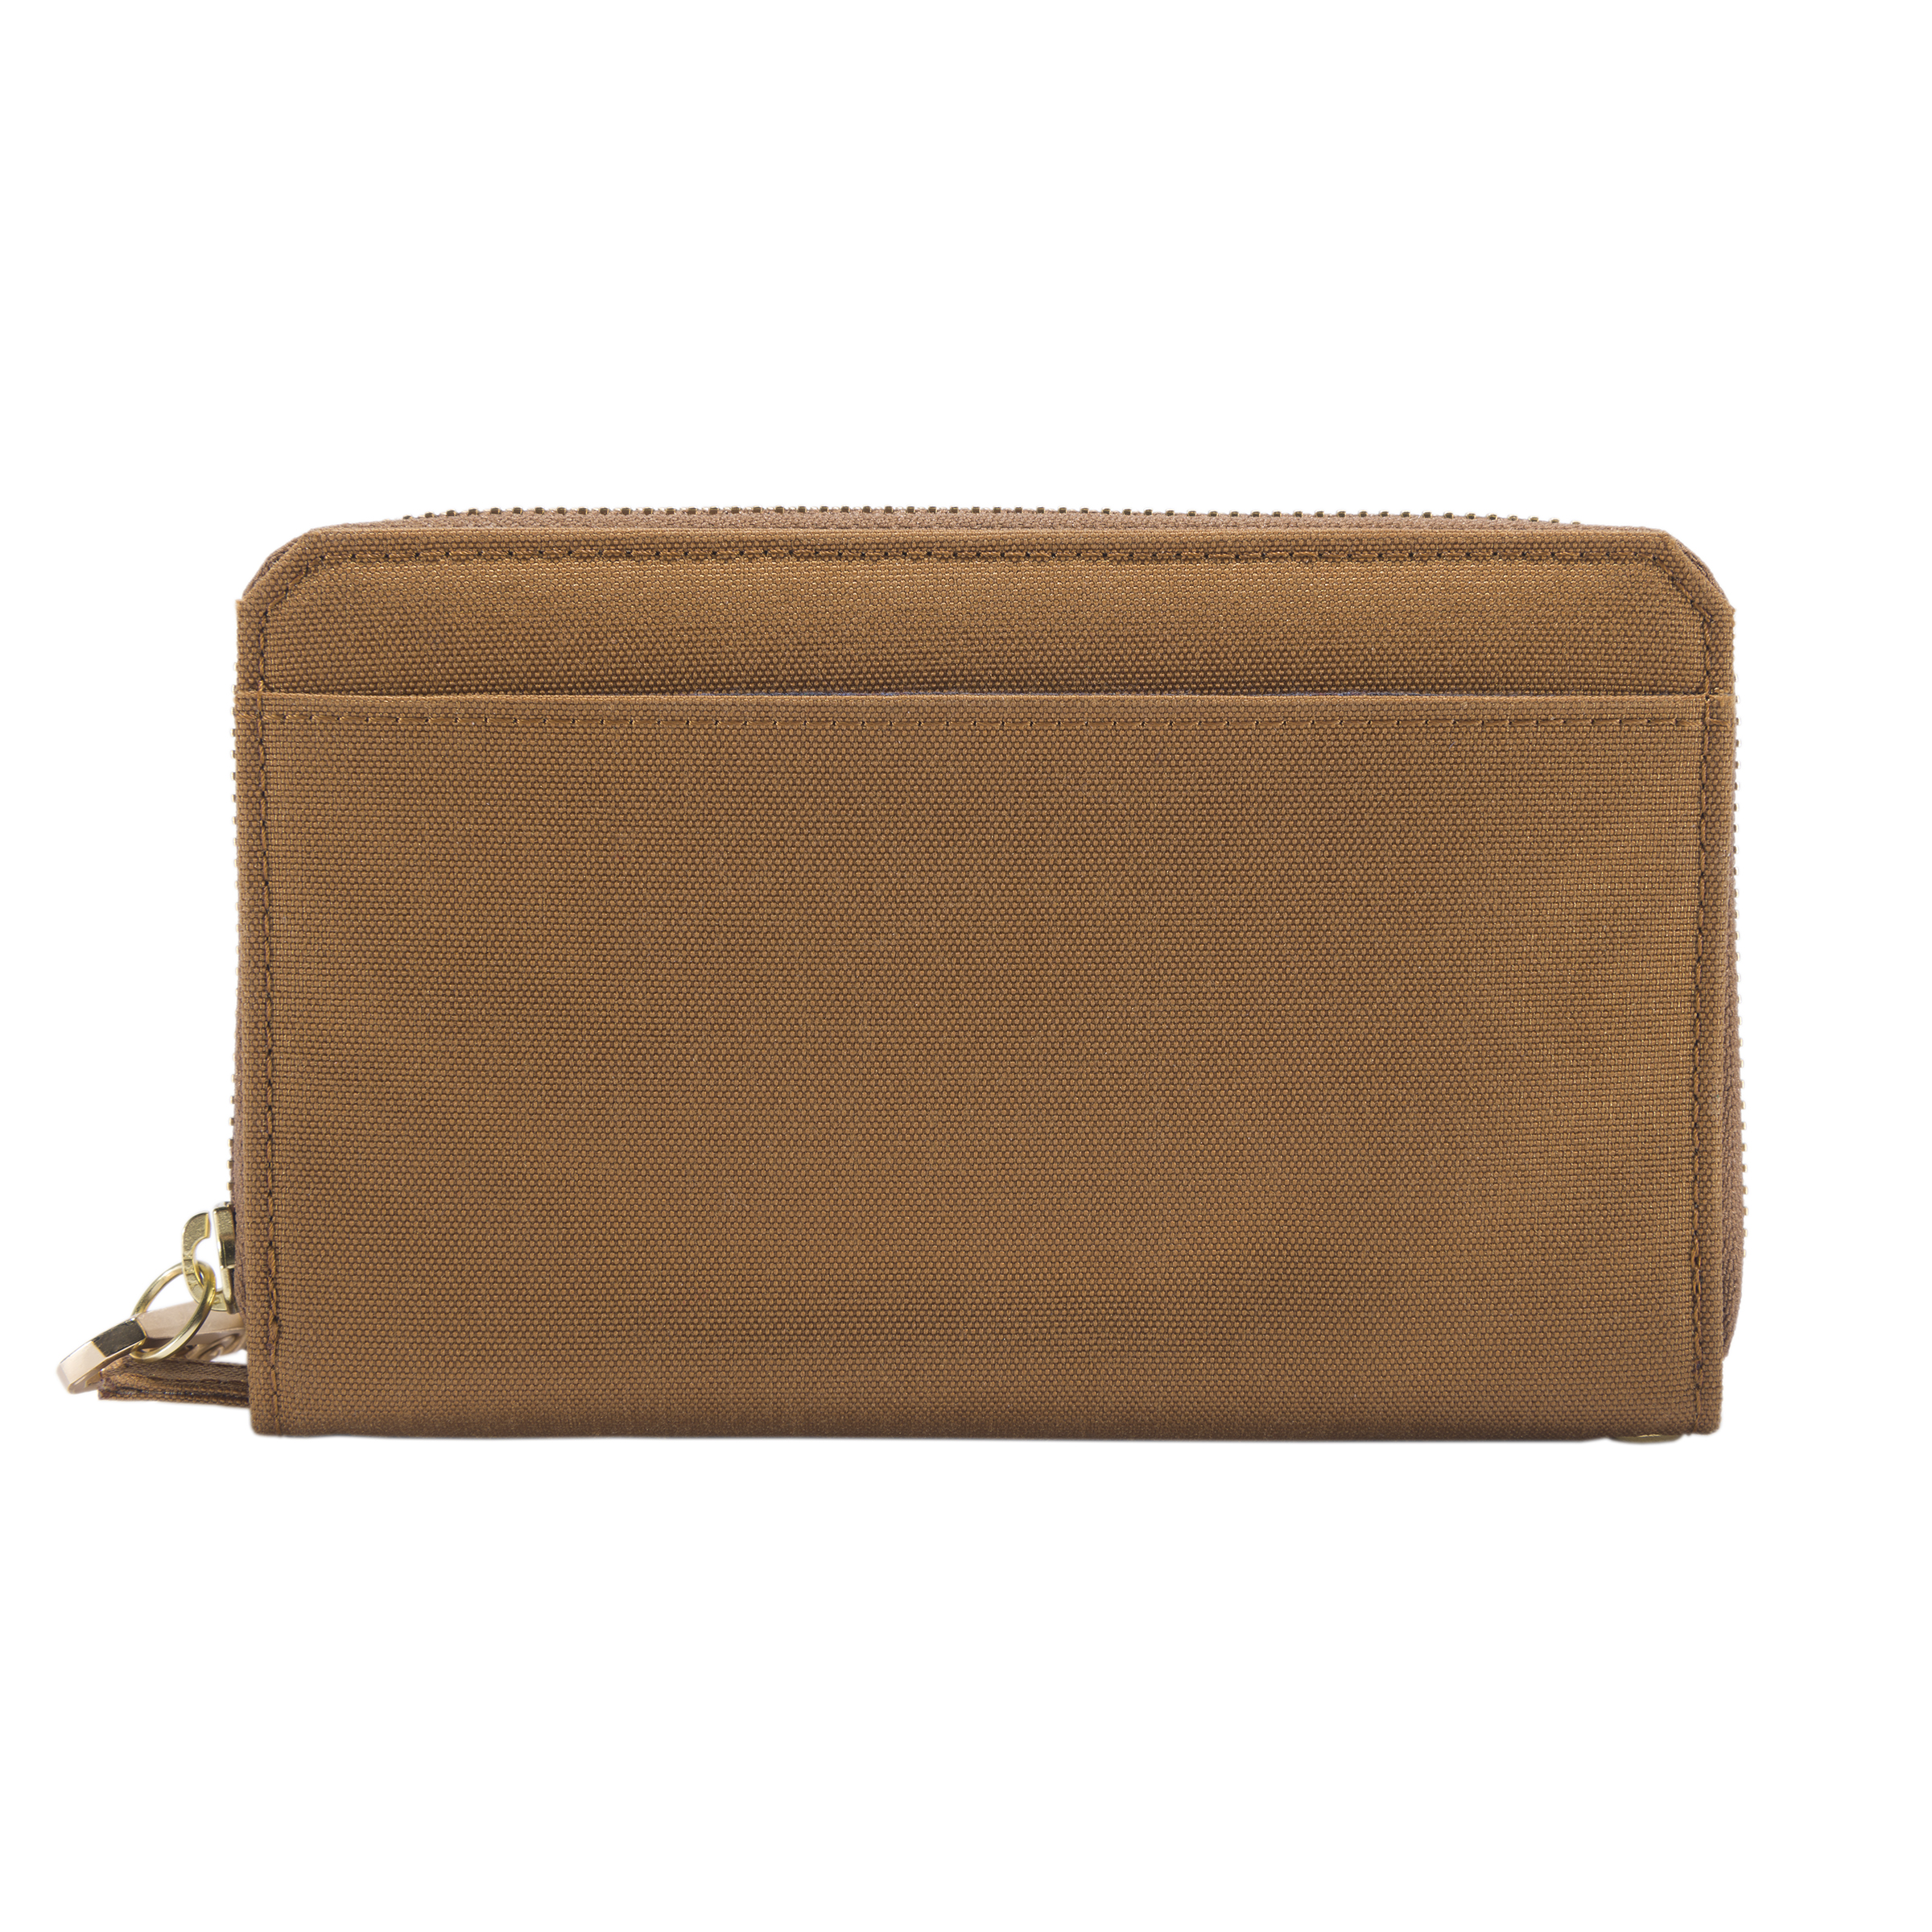 Picture of Carhartt B0000246 Mens Nylon Duck Lay-Flat Clutch Wallet